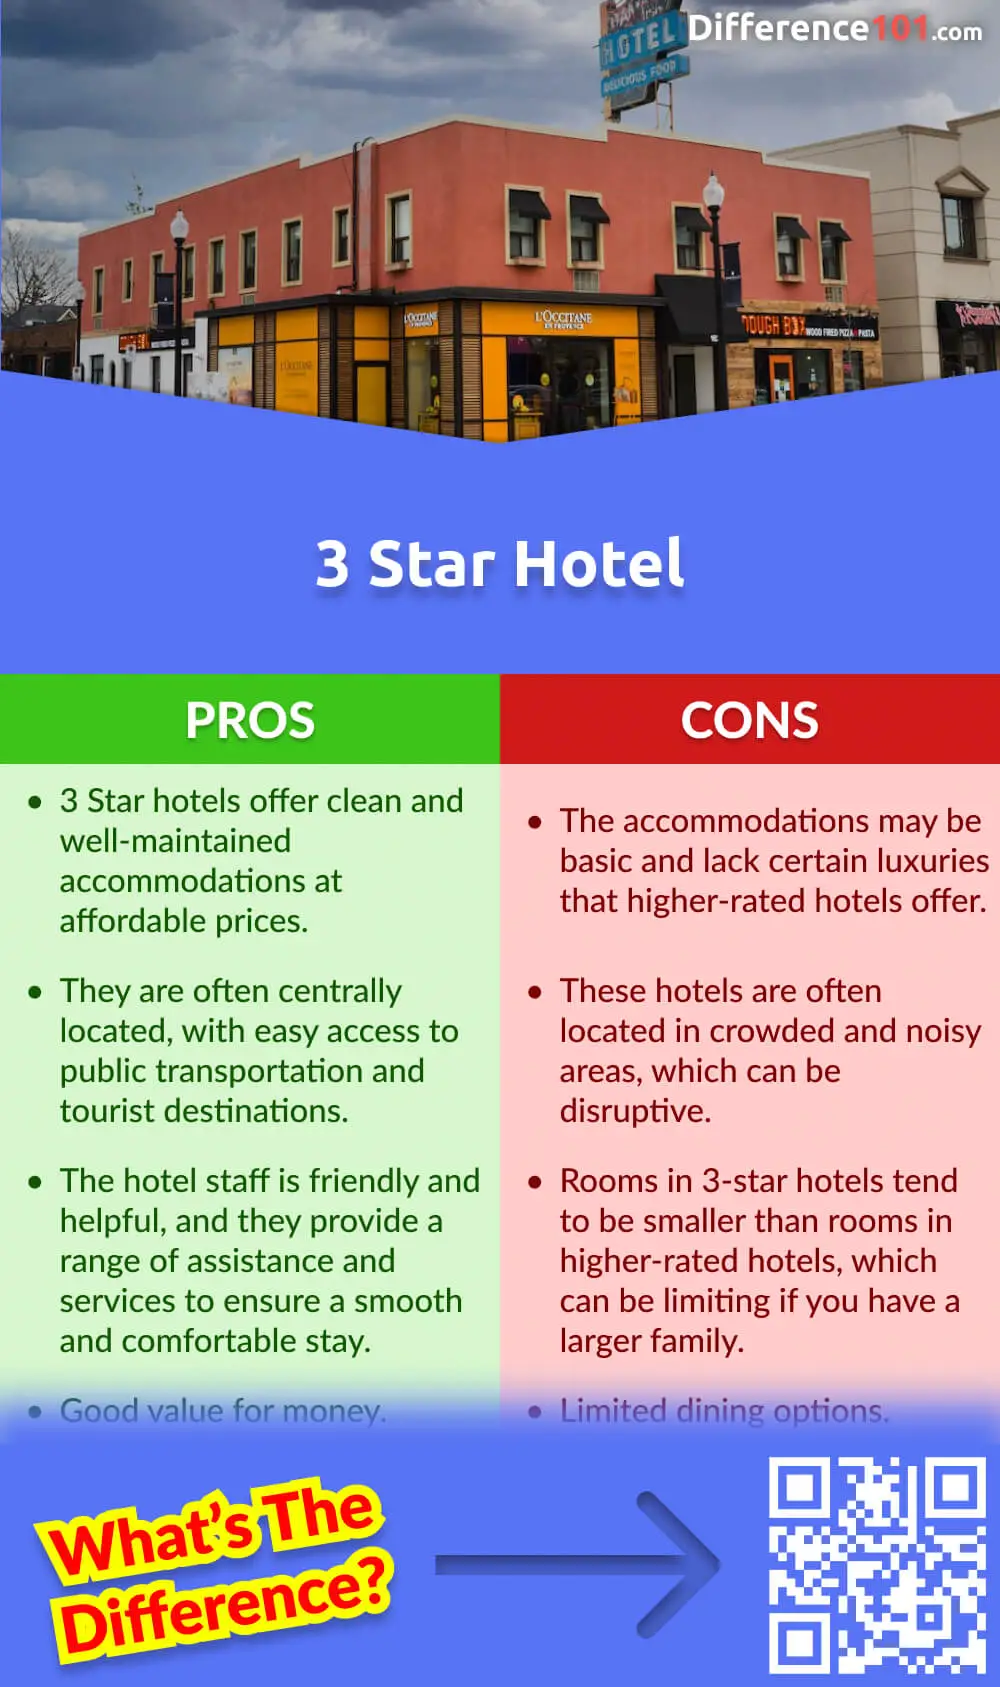 3 Star Hotel Pros & Cons
